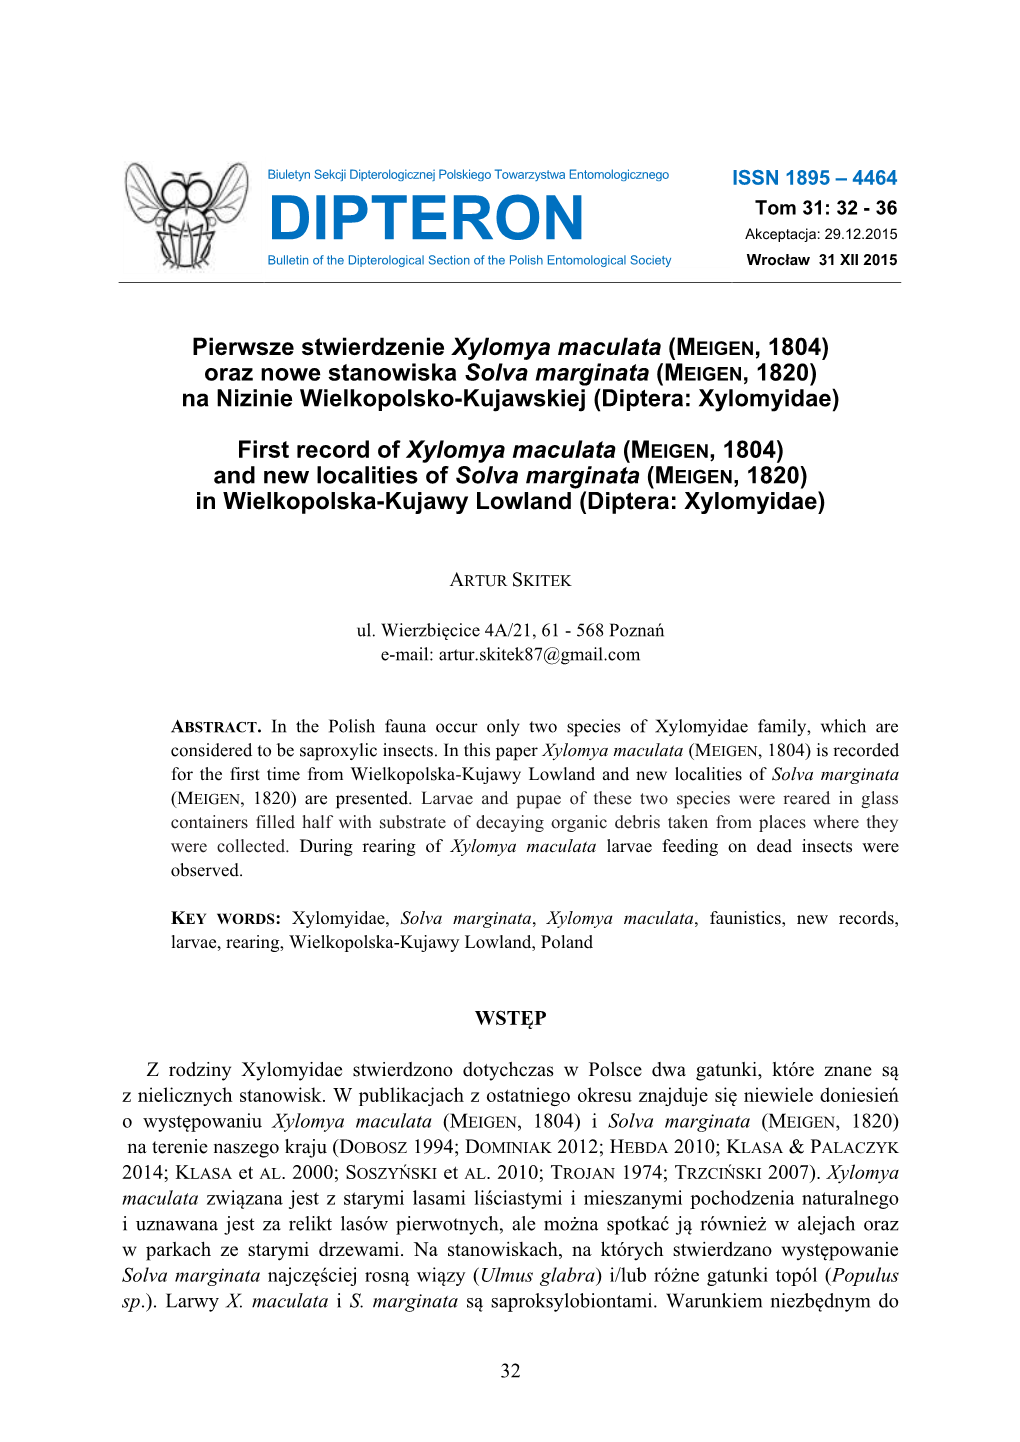 DIPTERON Bulletin of the Dipterological Section of the Polish Entomological Society Wrocław 31 XII 2015